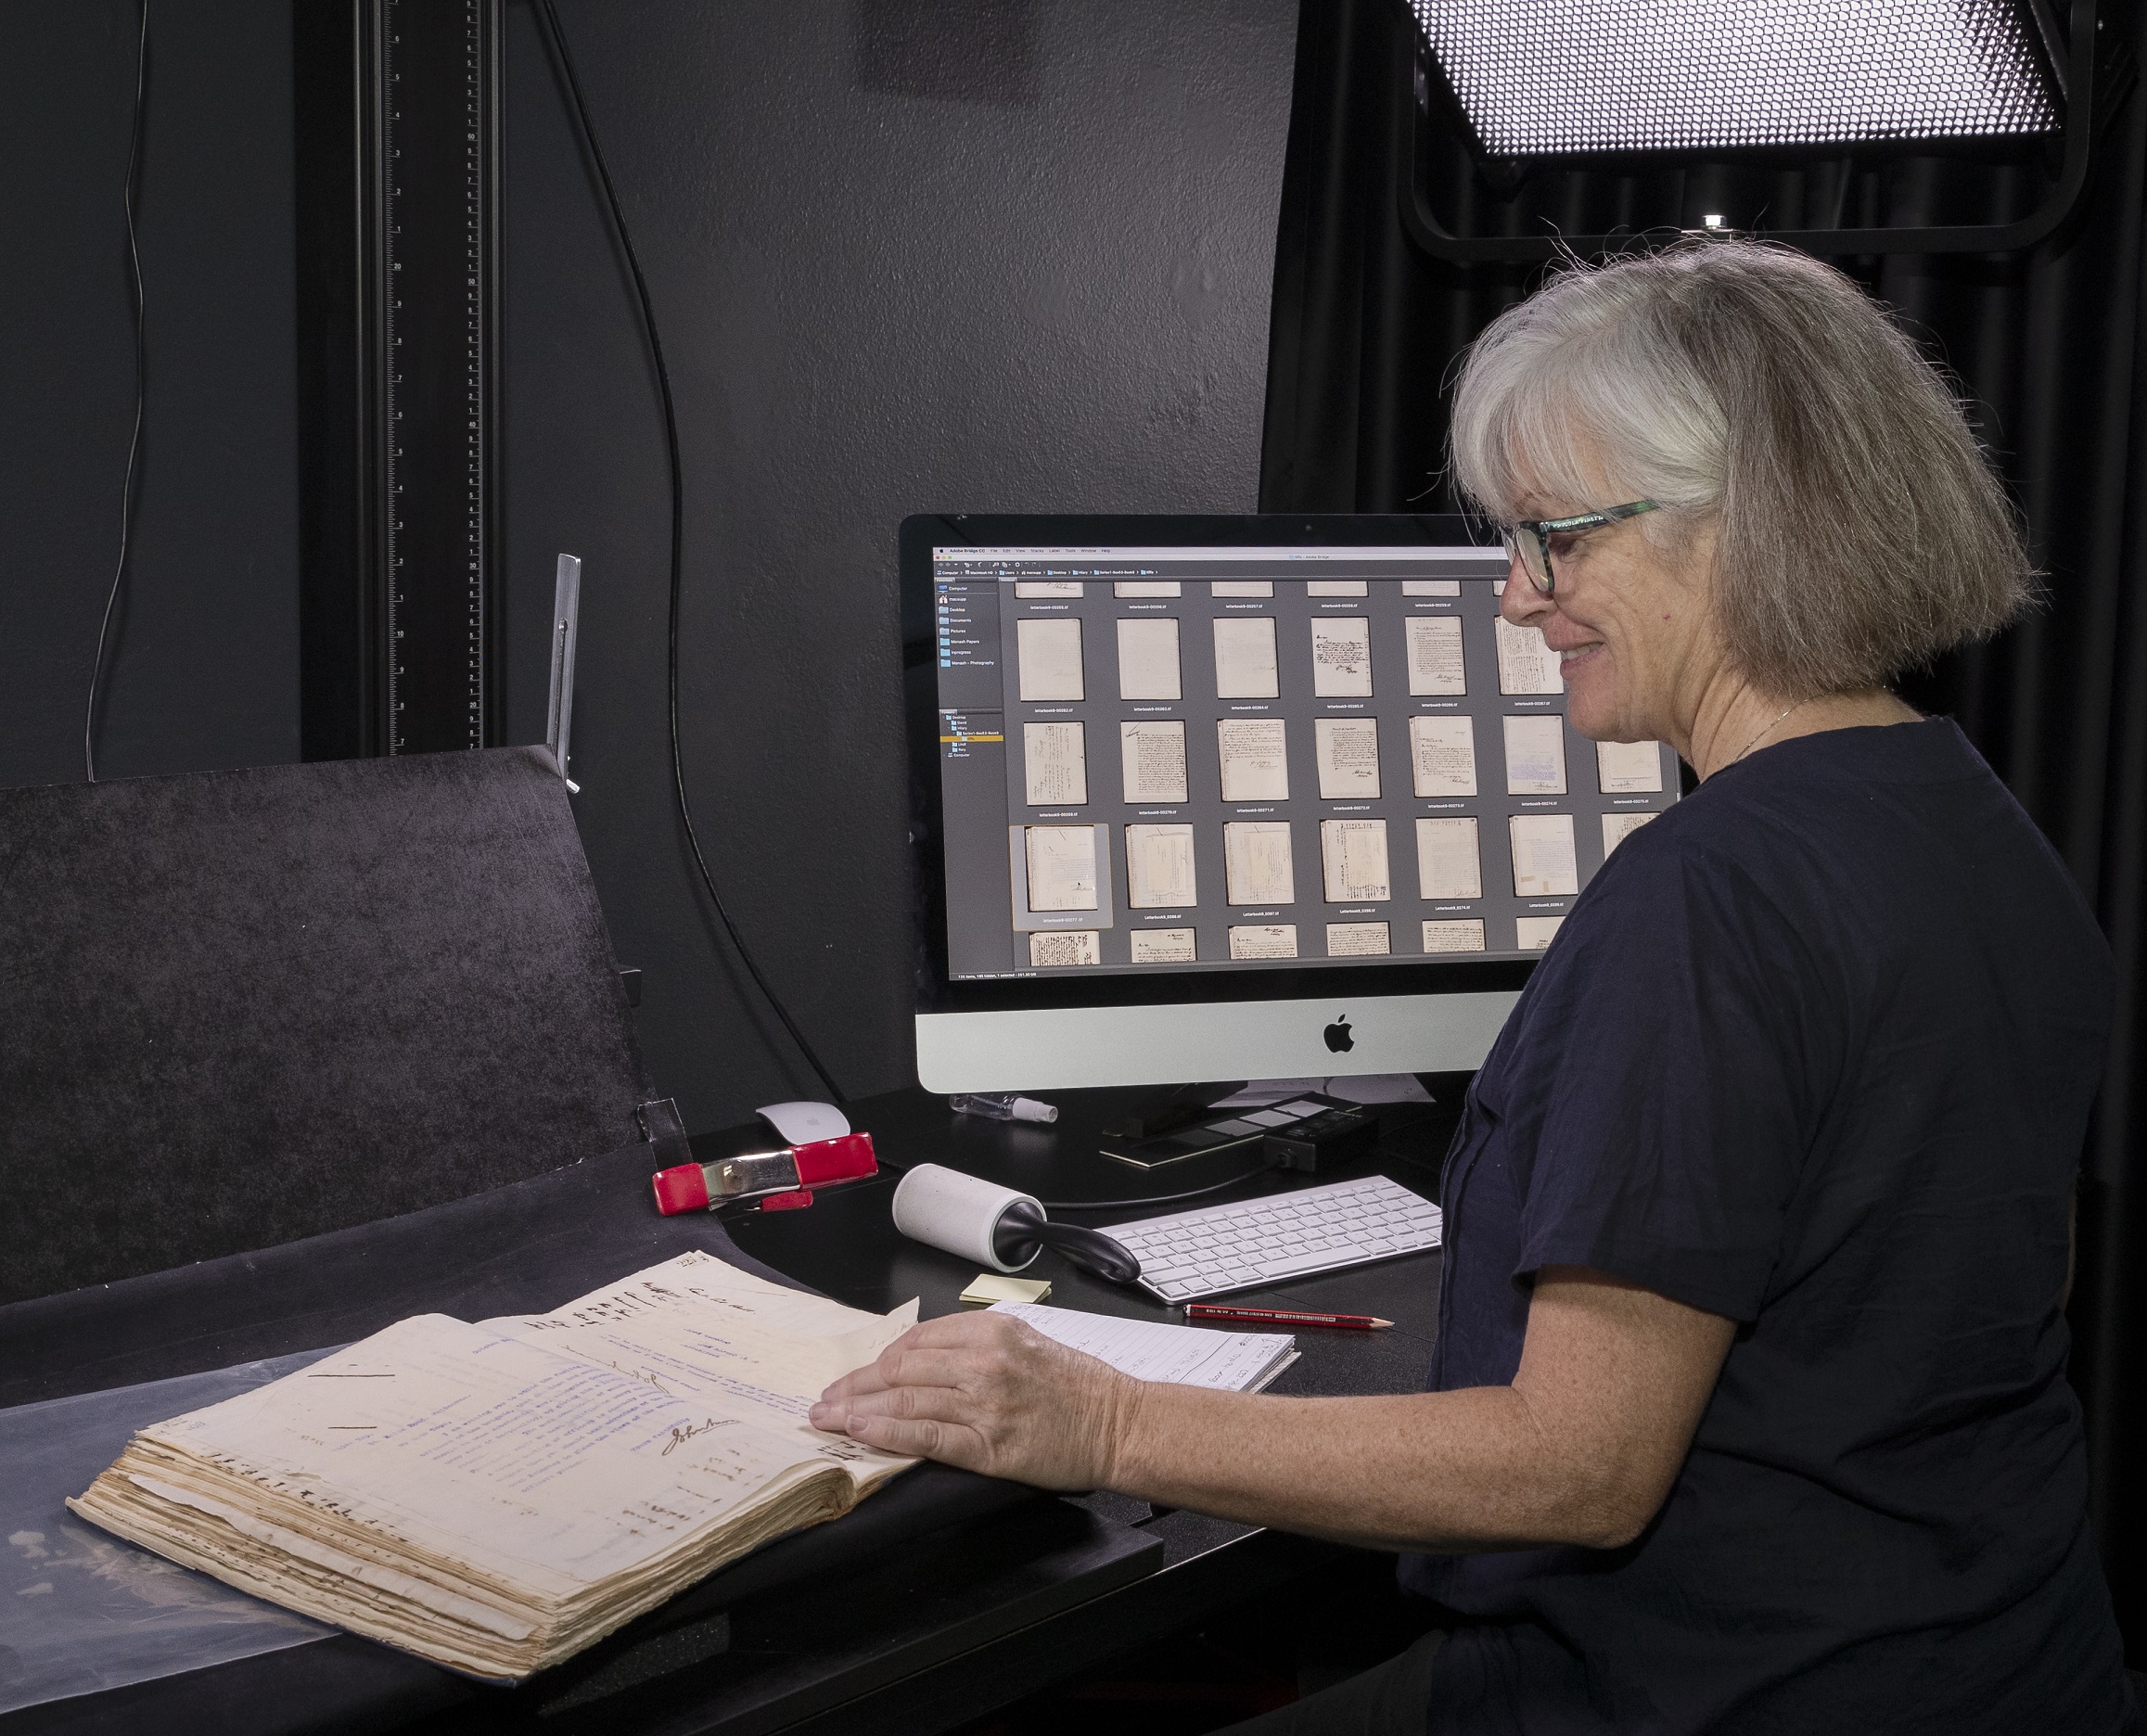 photographer reviewing digitised images of handwritten material